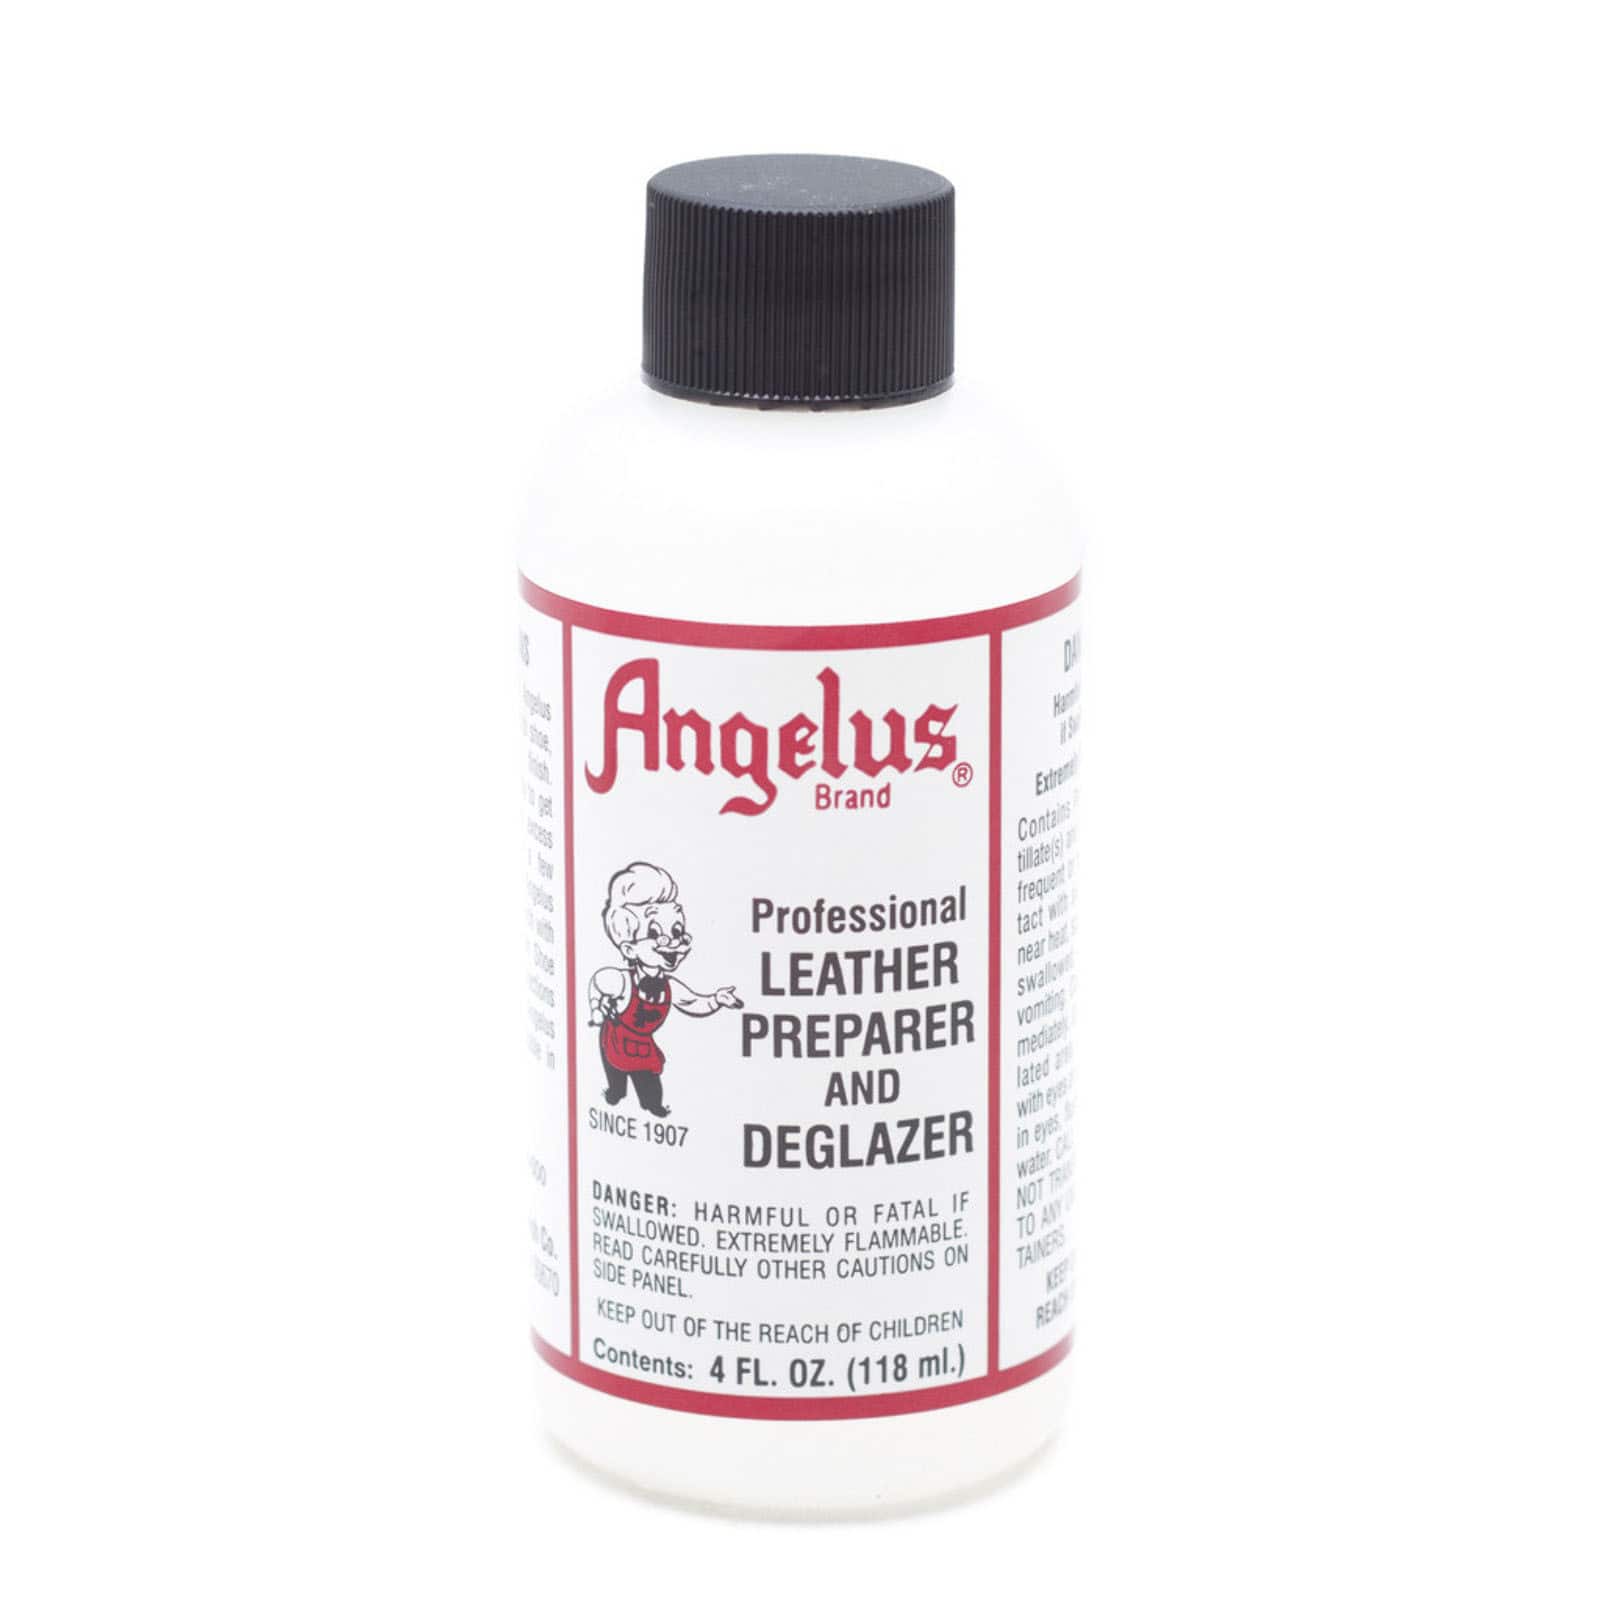 Acrylic Leather Paint Red - 1 oz (30 ml) – colorandcool